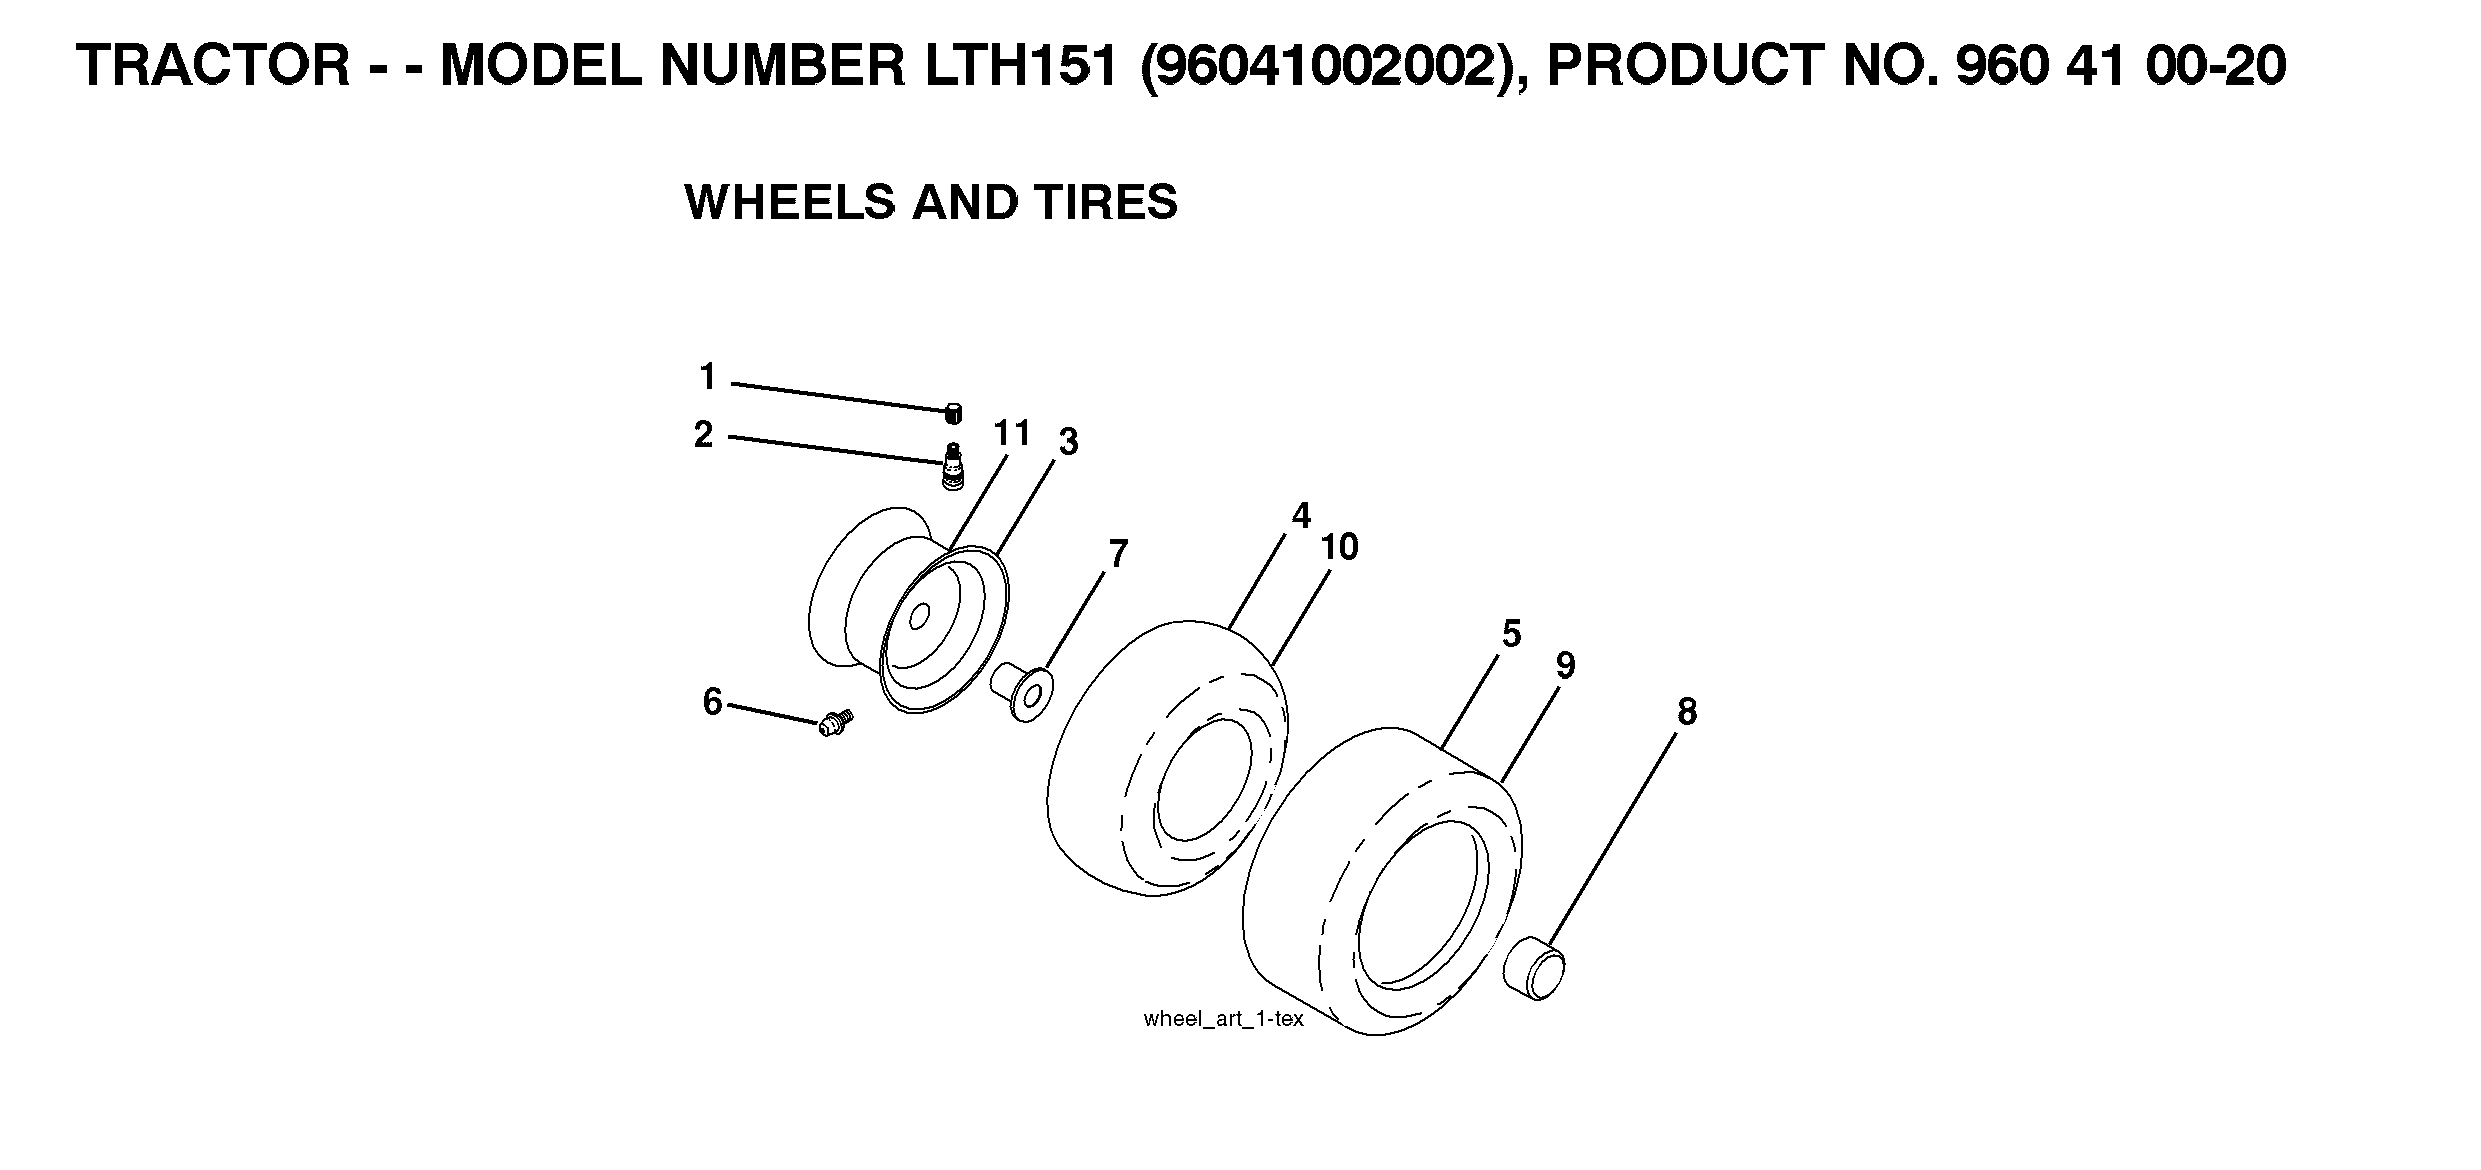 Wheels and tires 532059192, 532065139, 532106732, 532059904, 532122073, 532000278, 532009040, 532104757, 532420531, 532420531, 532007152, 532106108, 576707201